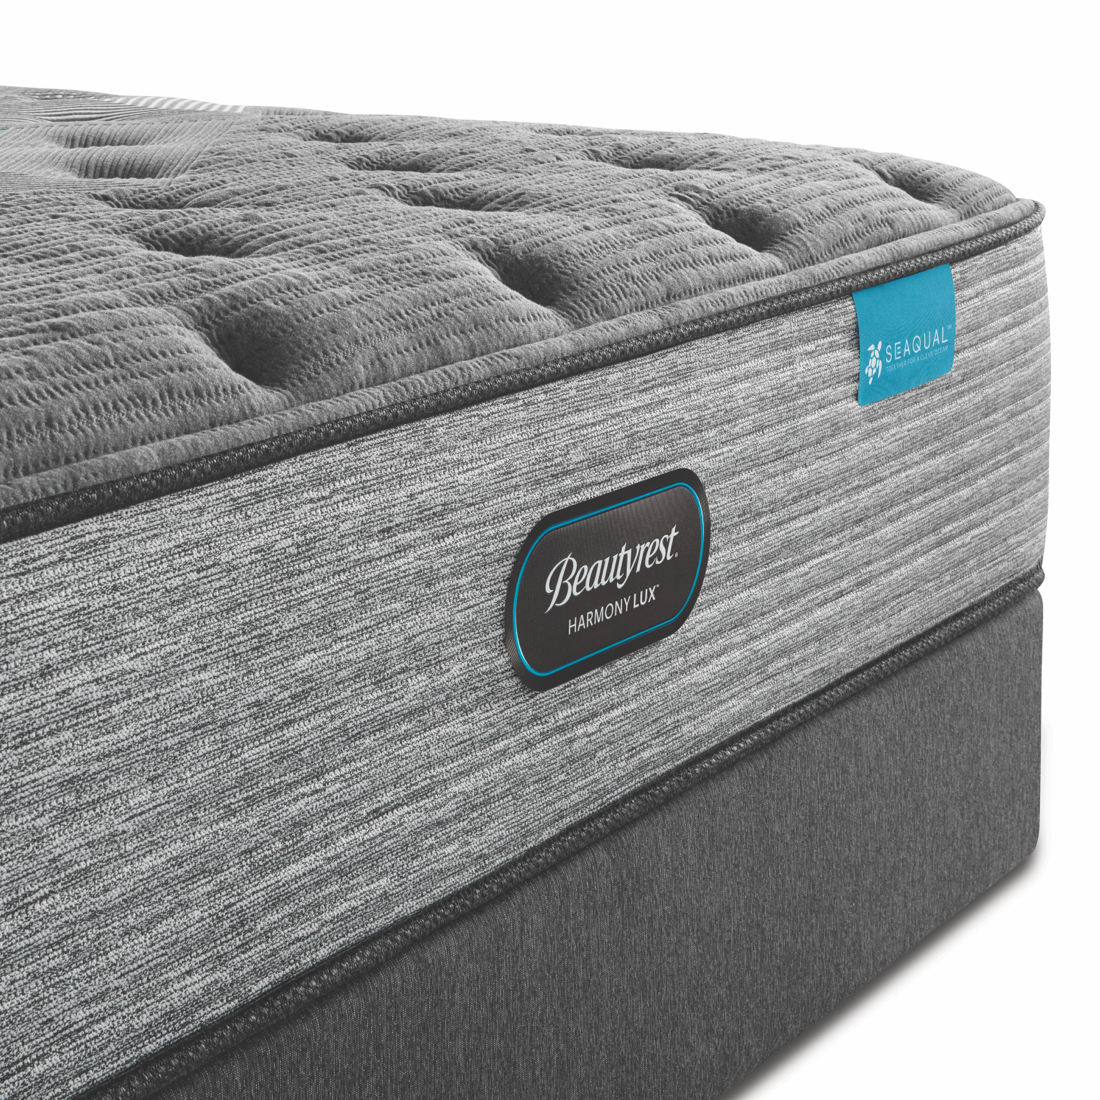 Corner view of the Beautyrest Harmony mattress on the Beautyrest flat foundation